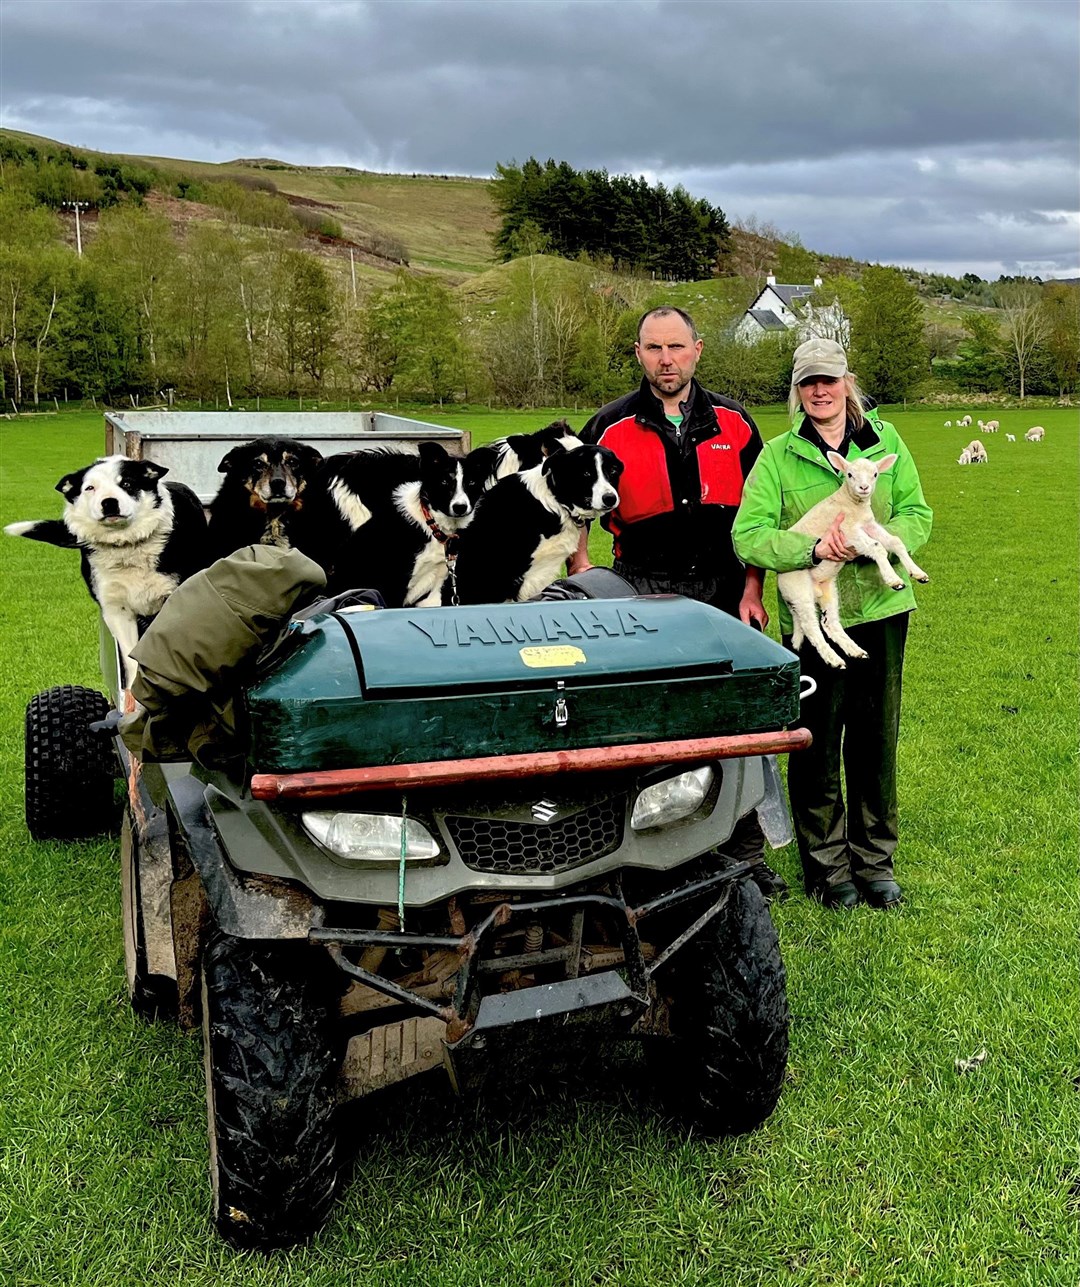 Ewan and Lucy Grant who farm at Gaskbeg by Laggan are desperately trying to protect their lambs from airborne raids.